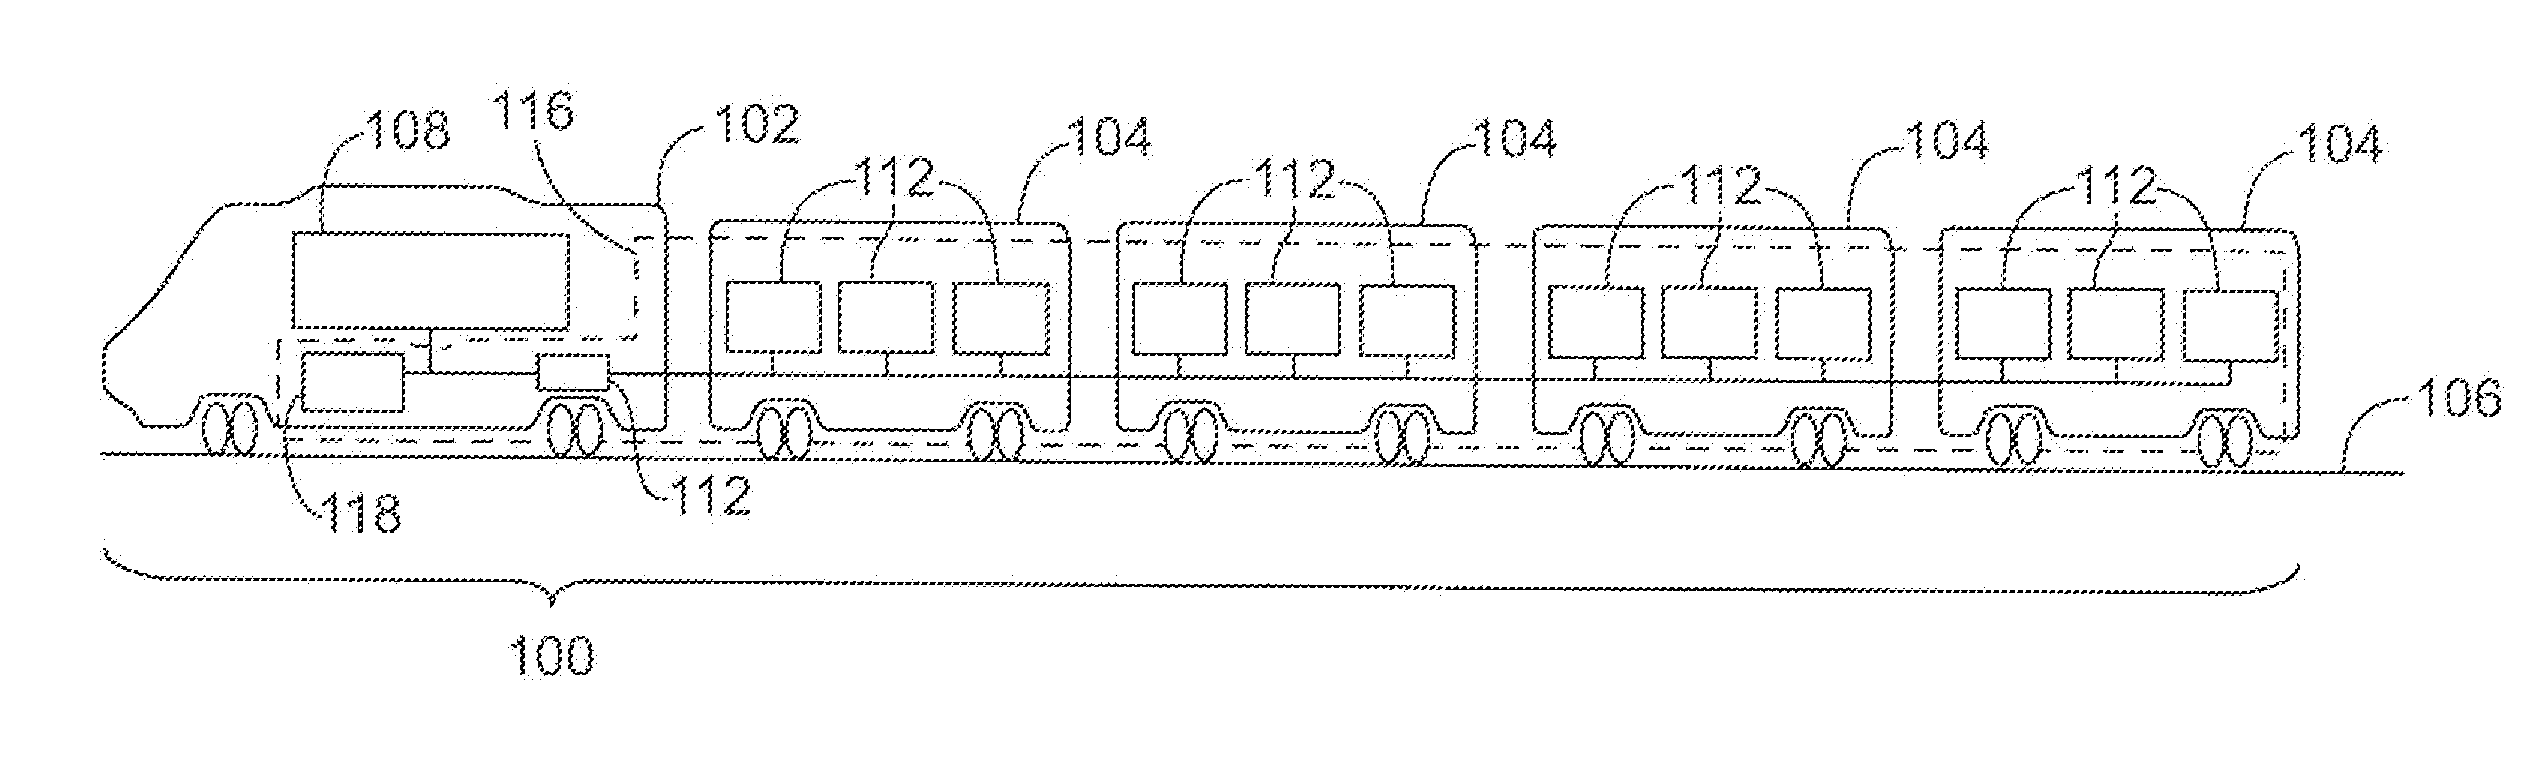 Powered distribution systems for powered rail vehicles